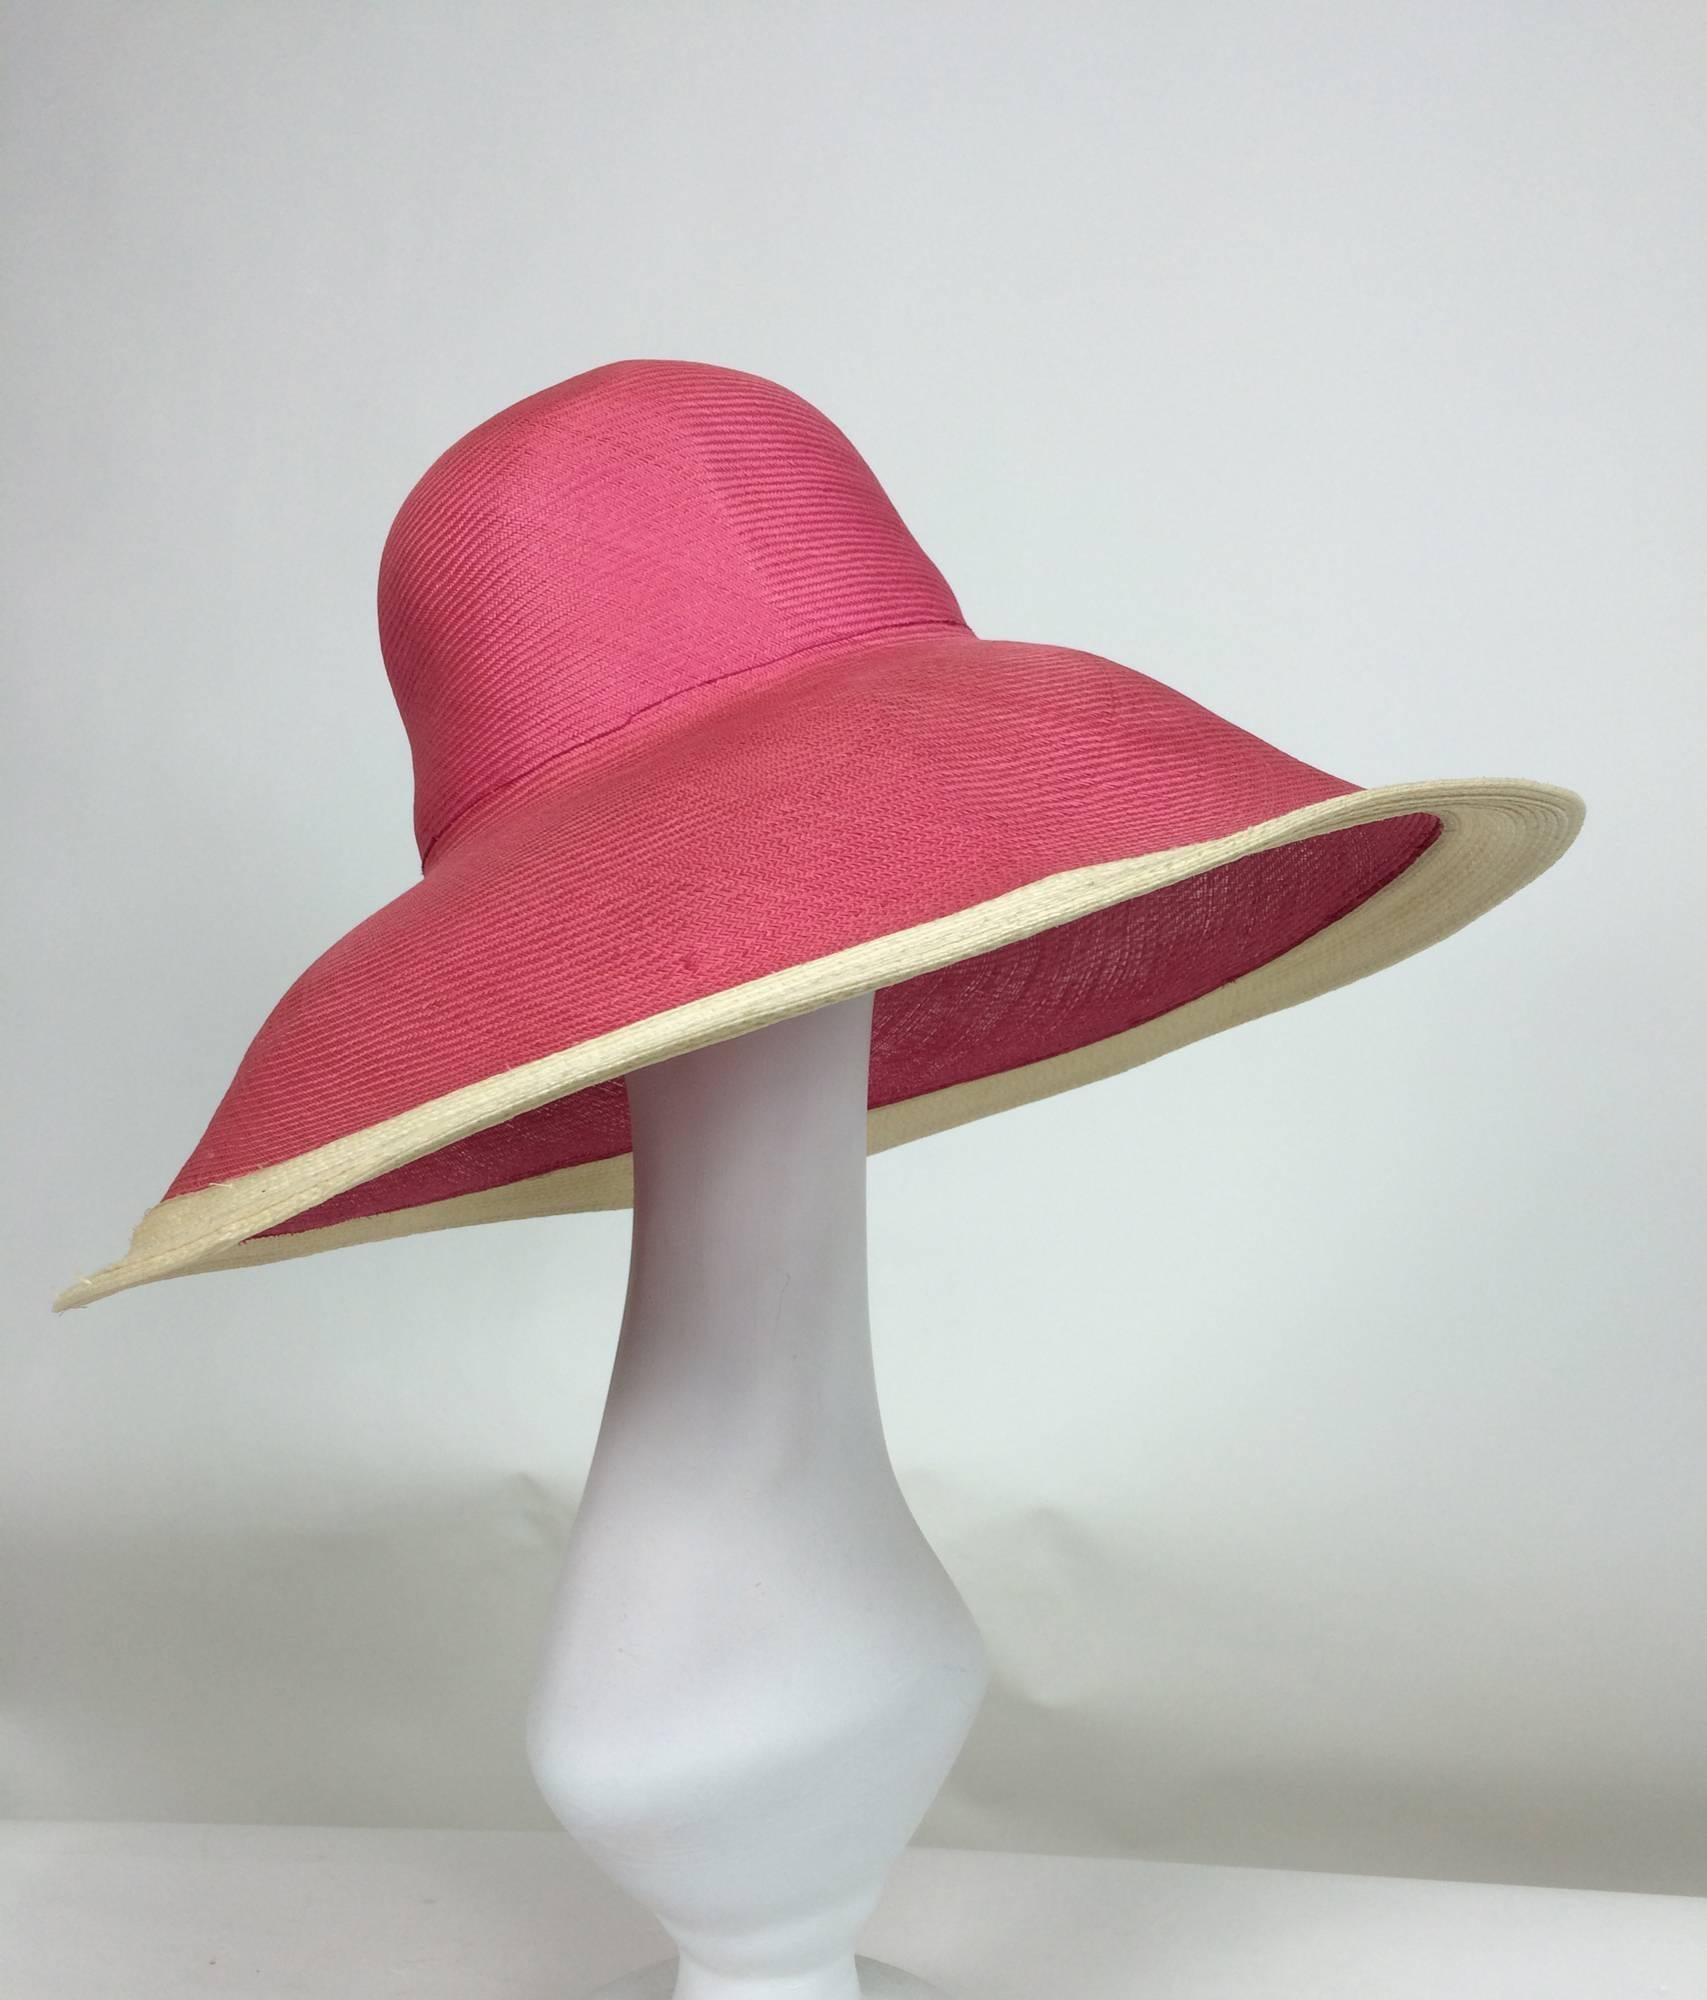 Deep brim finely woven straw hat with a high crown...The brim is meant to be turned down, the edge band is trimmed in natural straw...Unworn

In excellent wearable condition... All our clothing is dry cleaned and inspected for condition and is